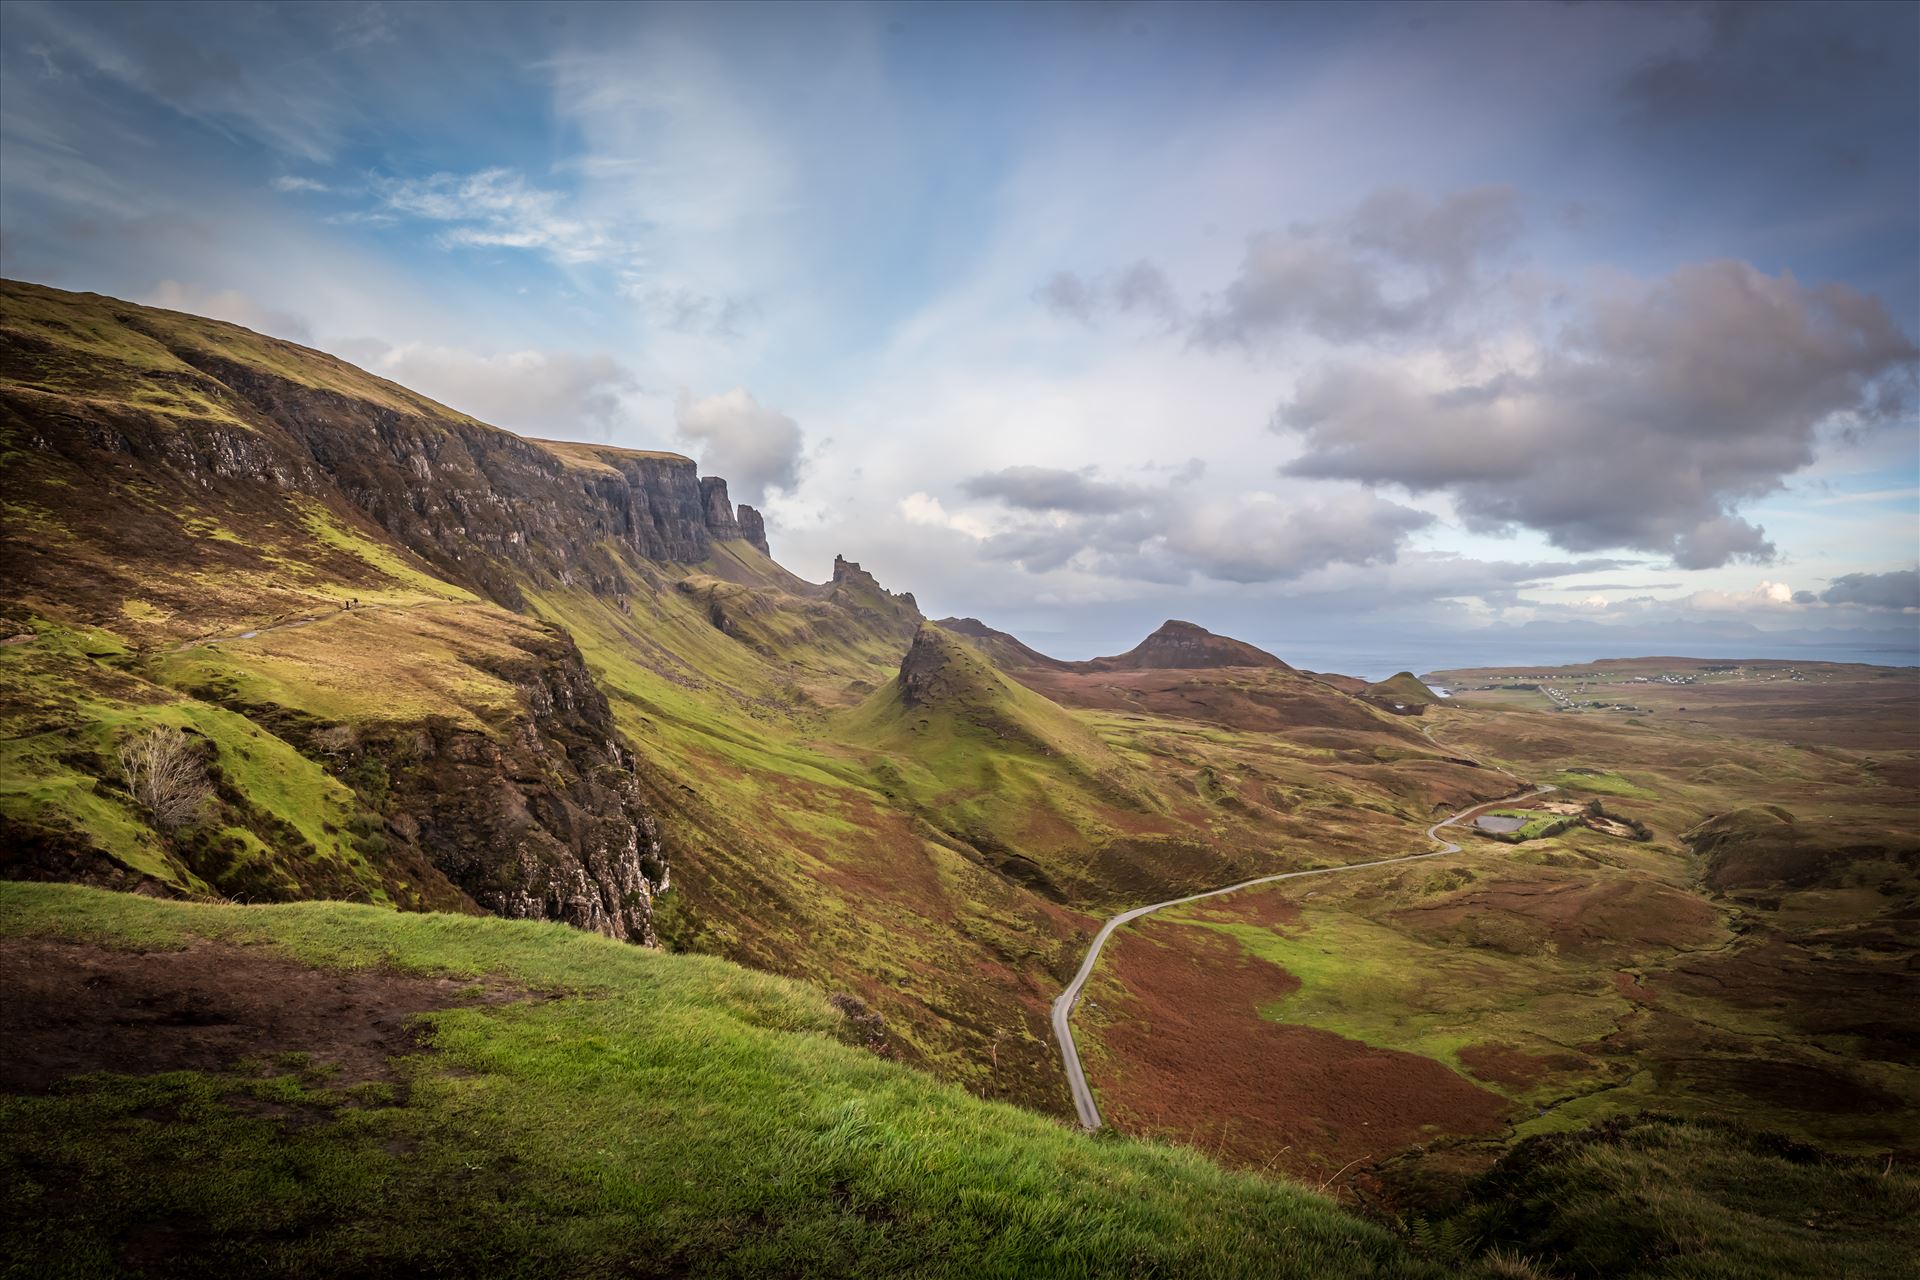 The Quiraing (3) The Quiraing is a landslip on the northernmost summit of the Trotternish on the Isle of Skye. The whole of the Trotternish Ridge escarpment was formed by a great series of landslips, the Quiraing is the only part of the slip still moving. by philreay